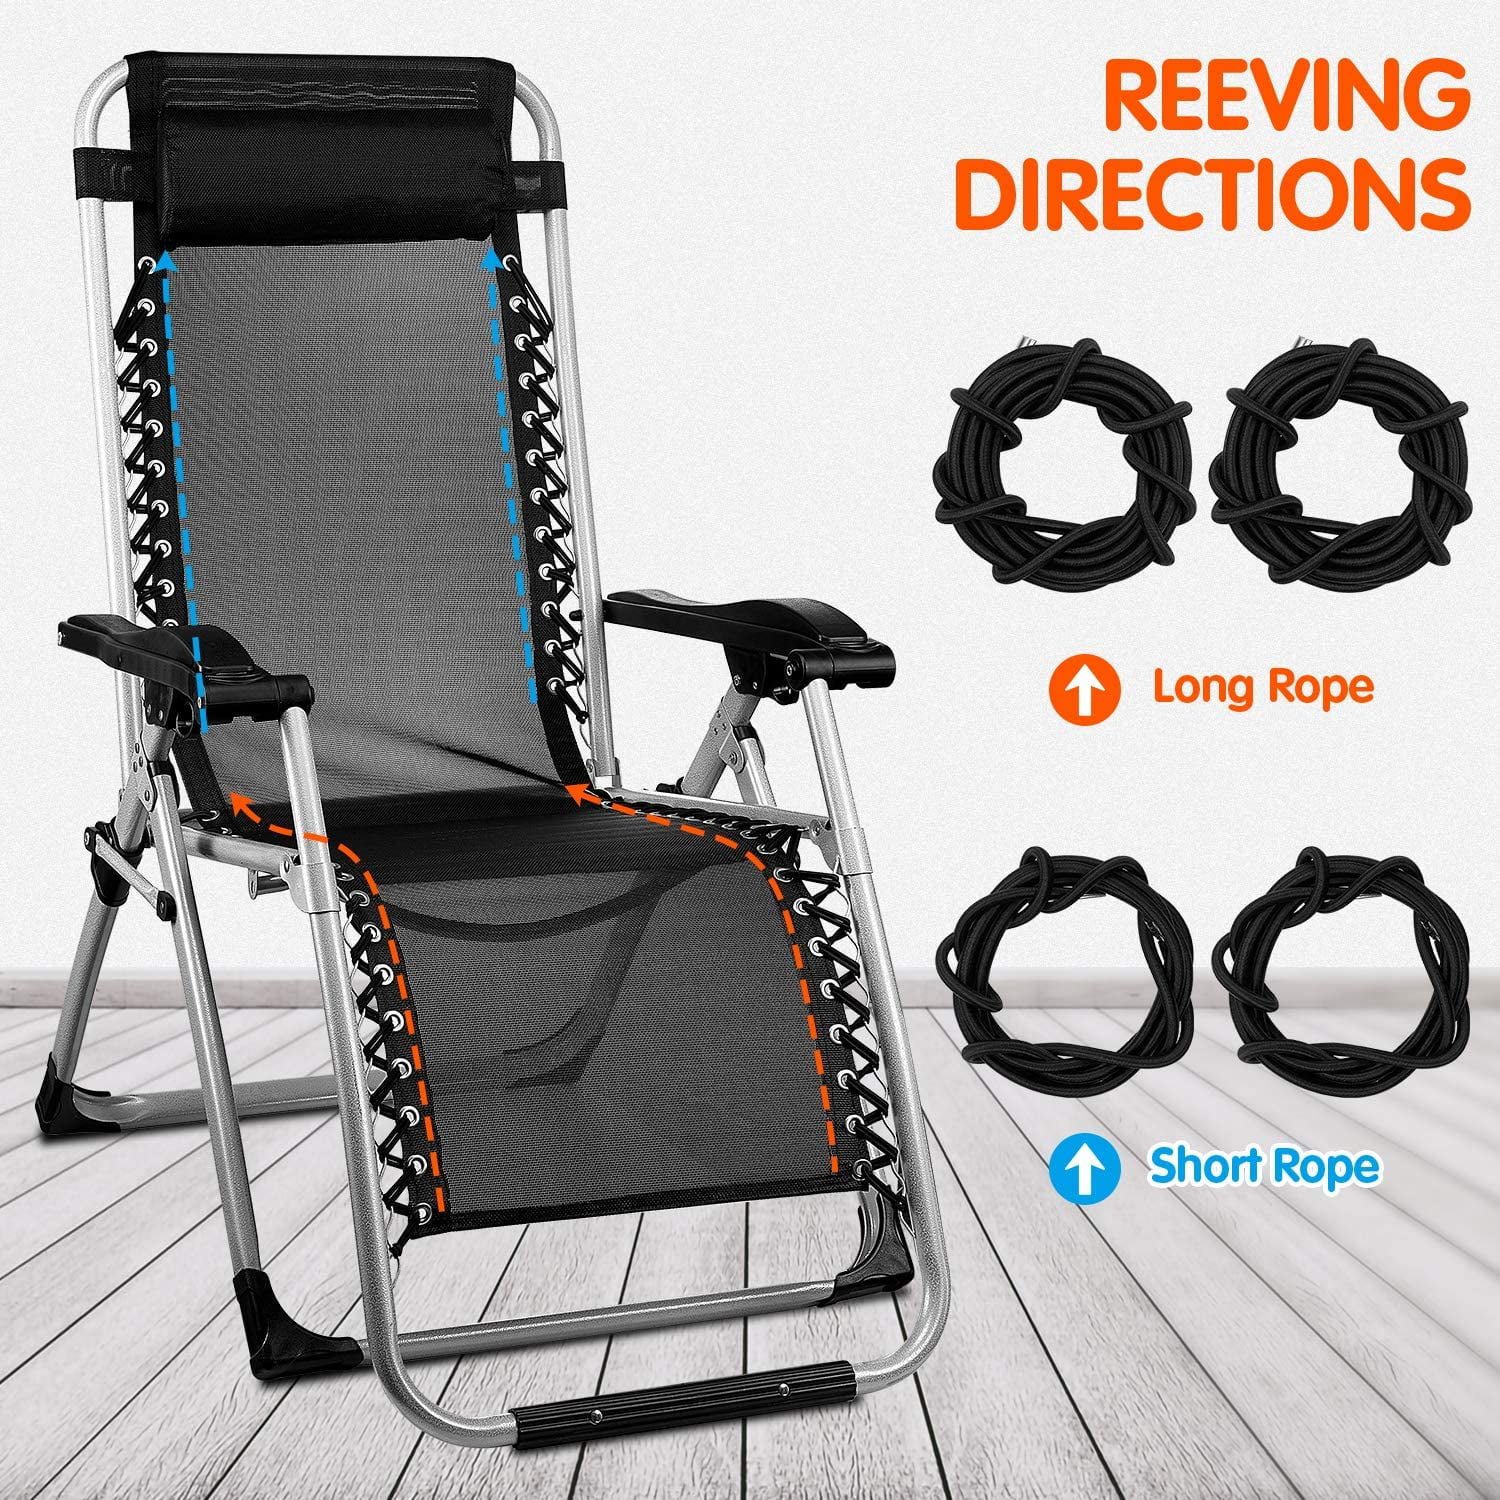 8 Pieces Cords Strings Ropes for Fishing Non-gravity Folding Chairs Black 